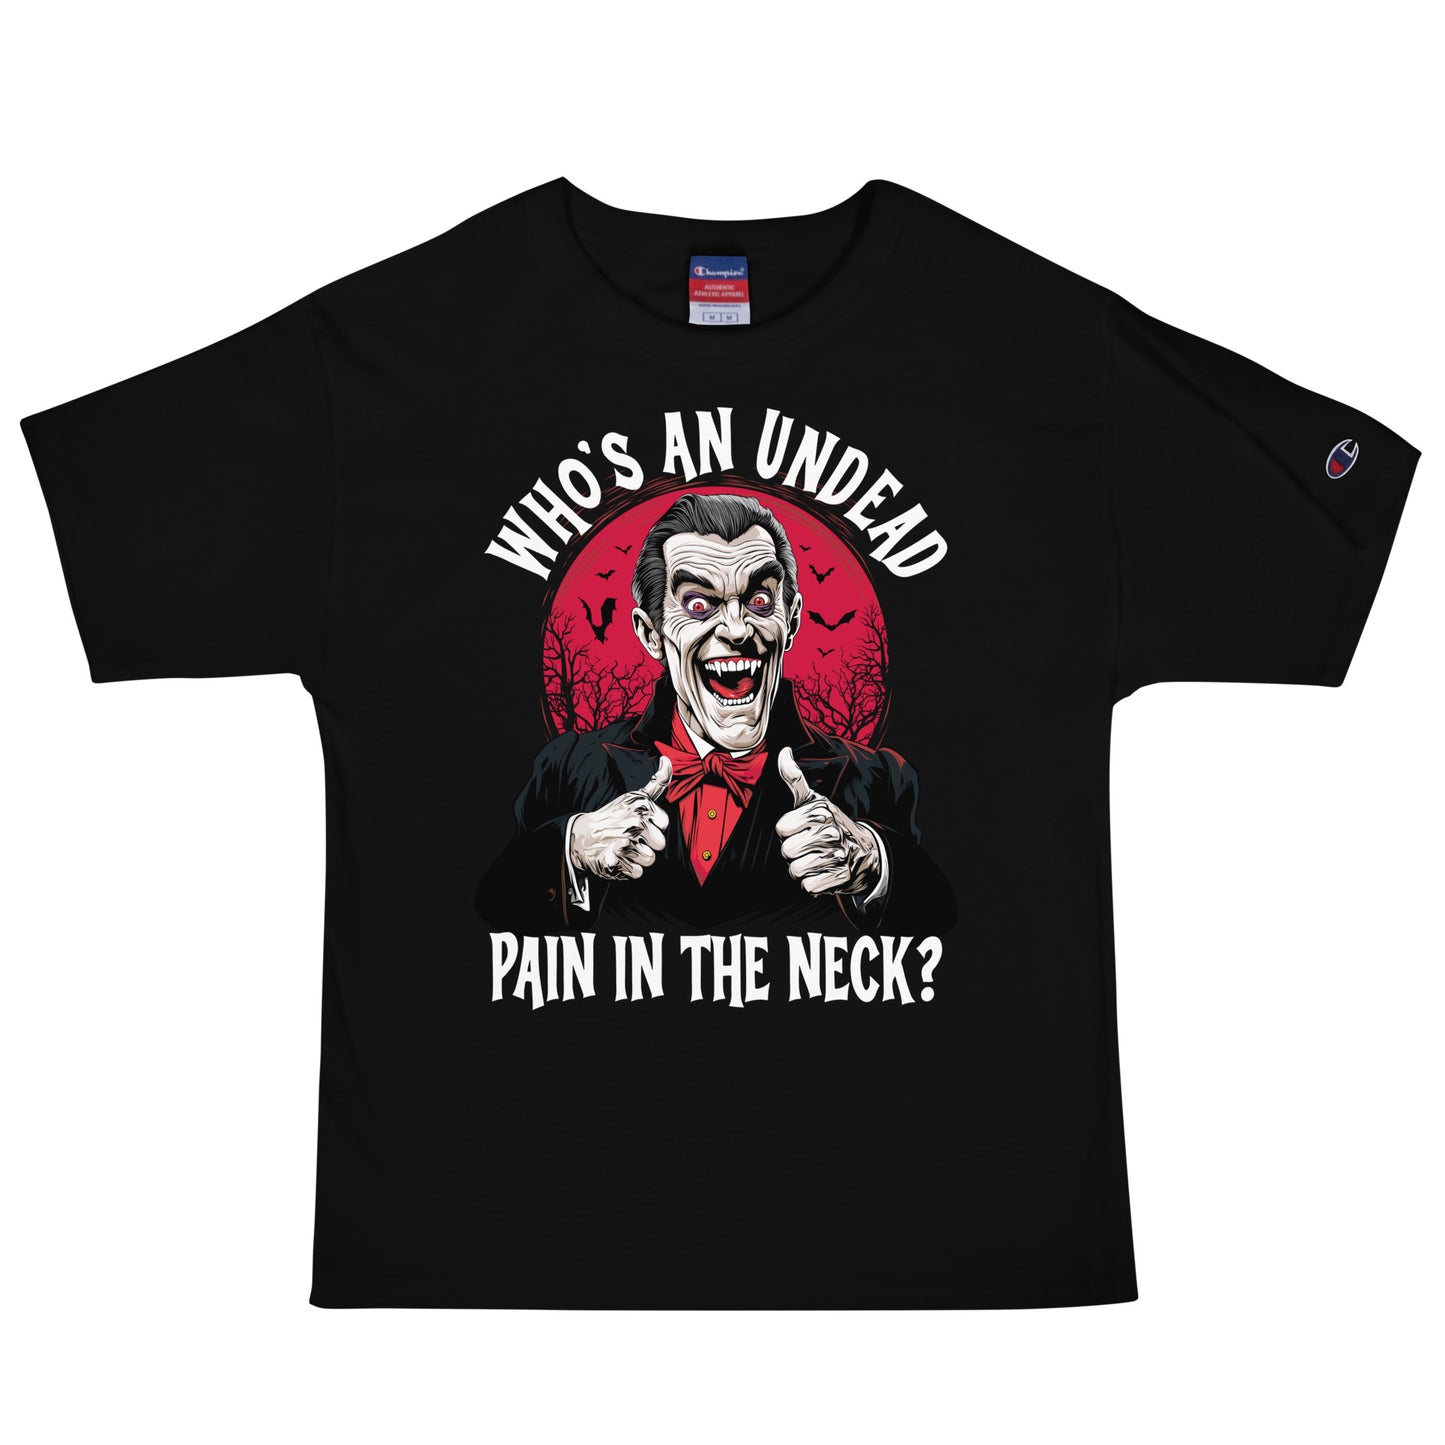 Who's an Undead pain in the neck? Men's Champion Relaxed Fit T-shirt